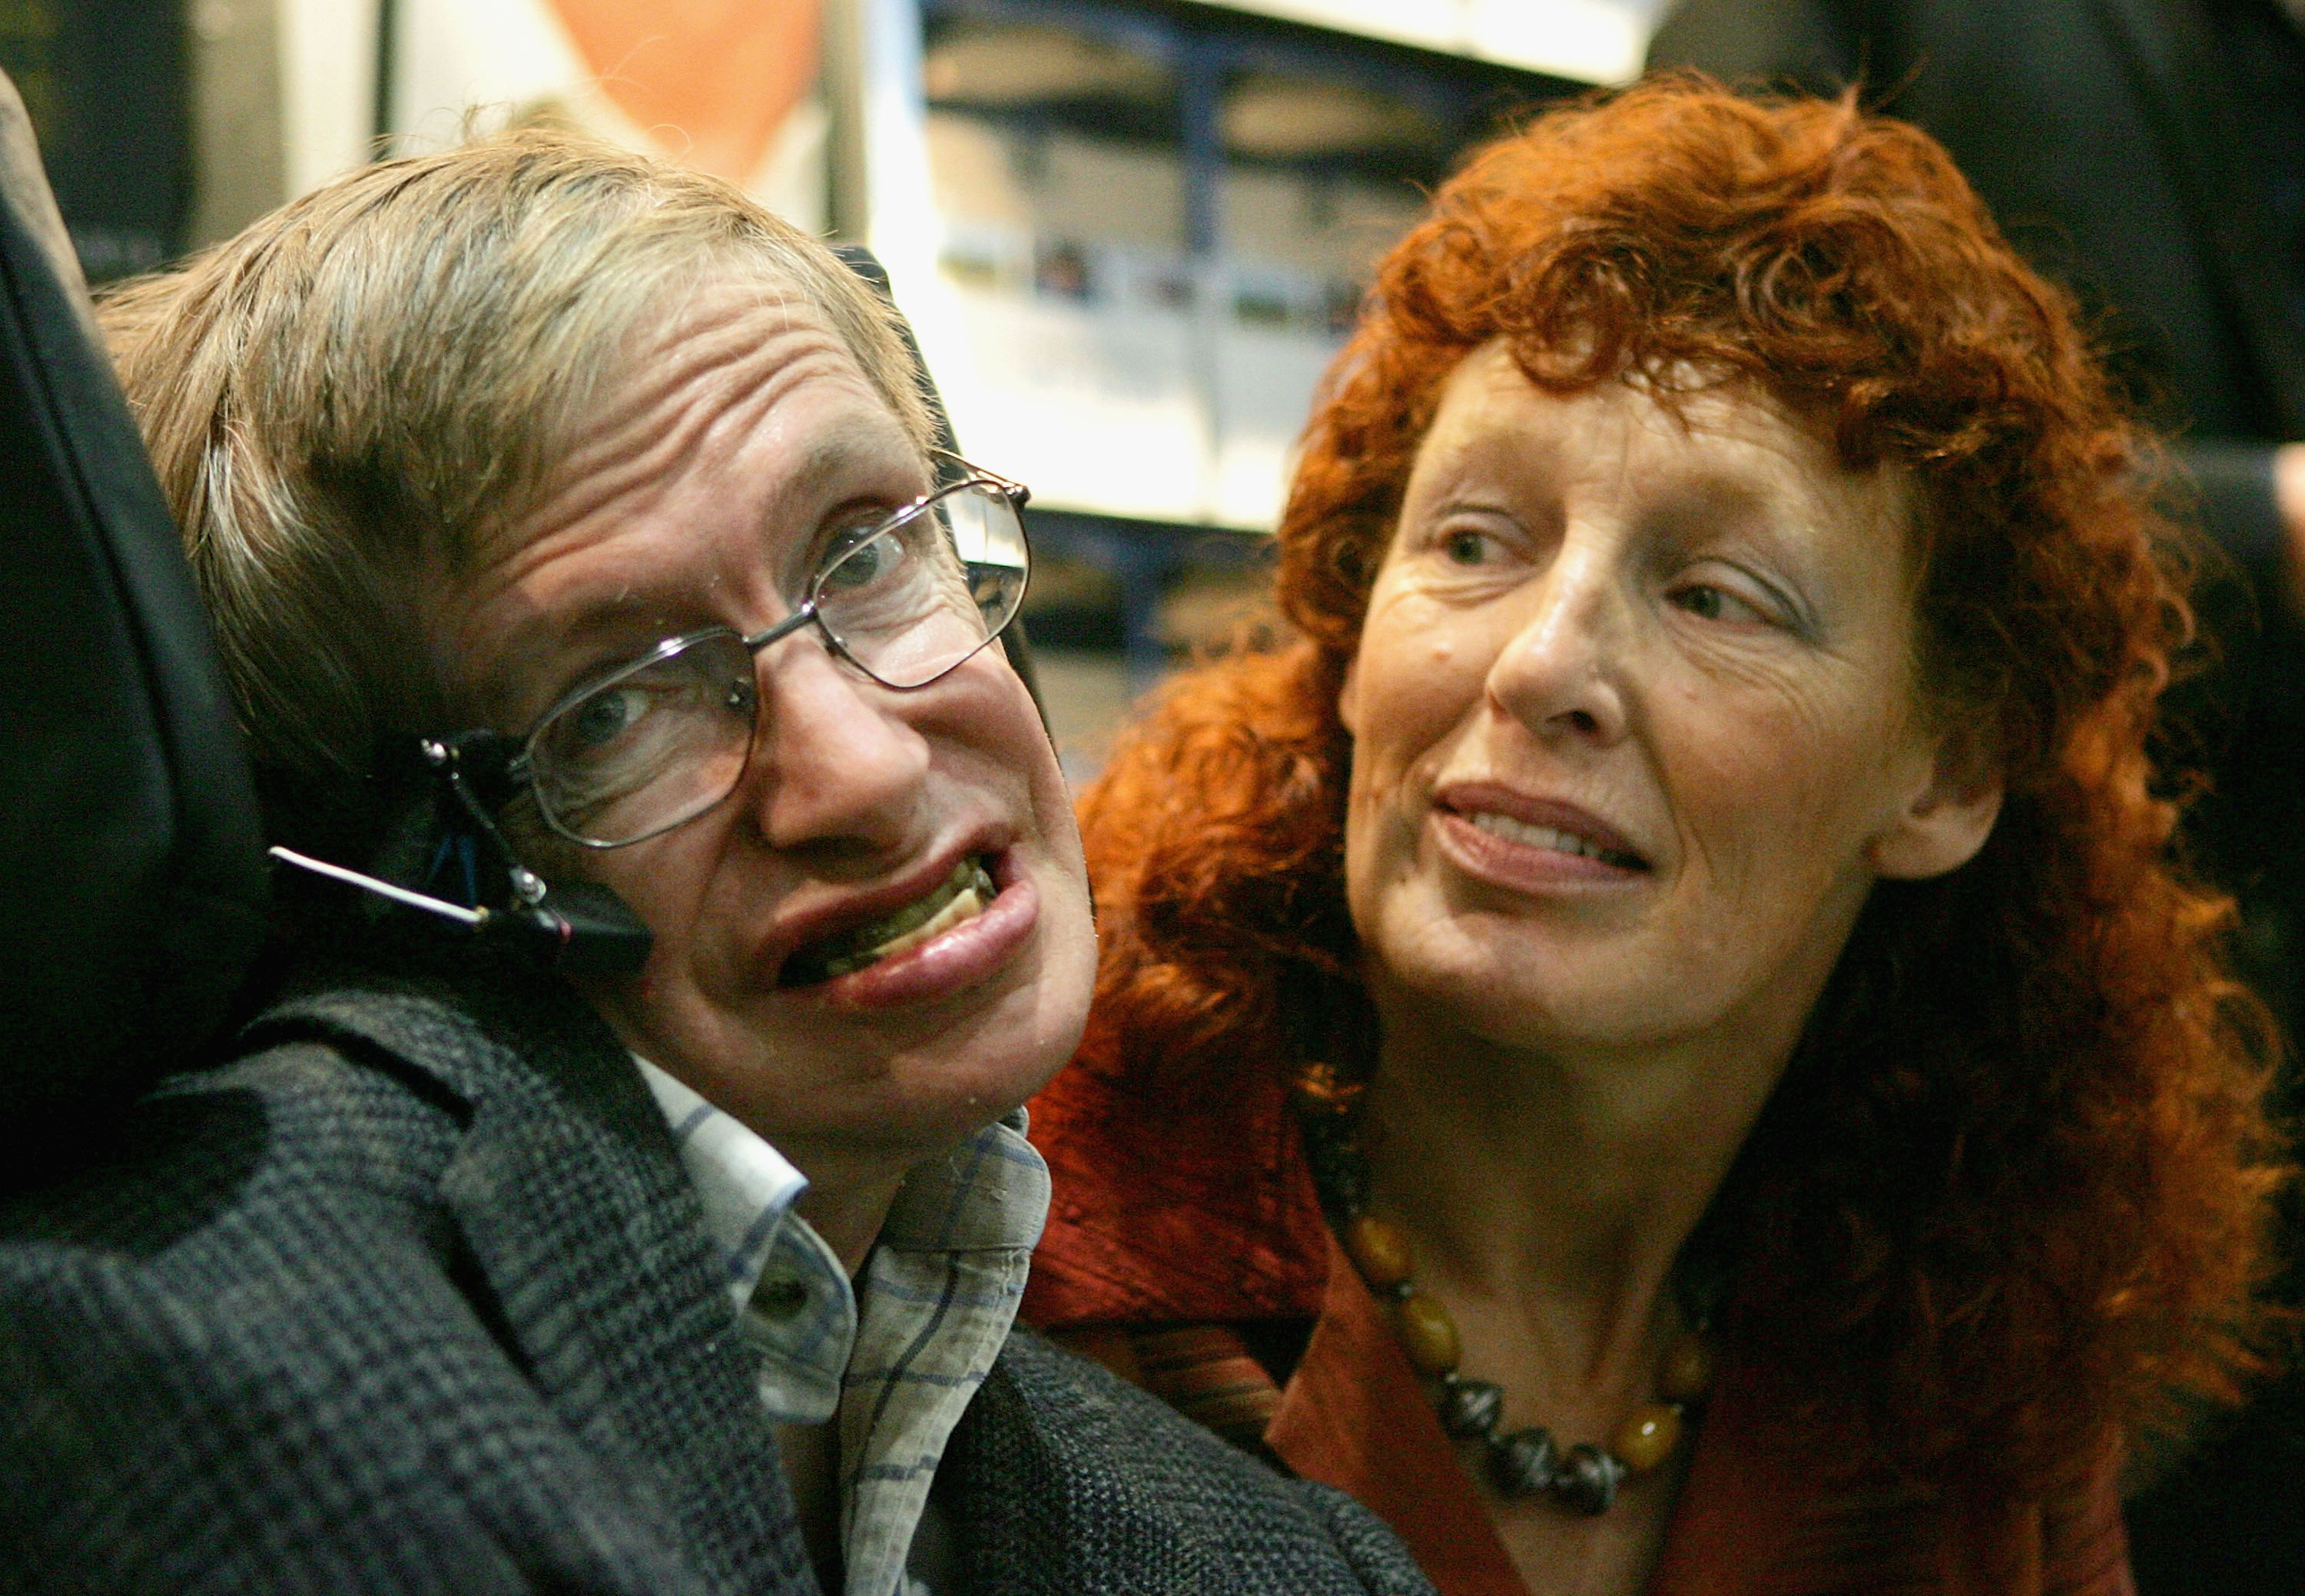 Elaine Mason, Stephen Hawking’s Second Wife 5 Fast Facts